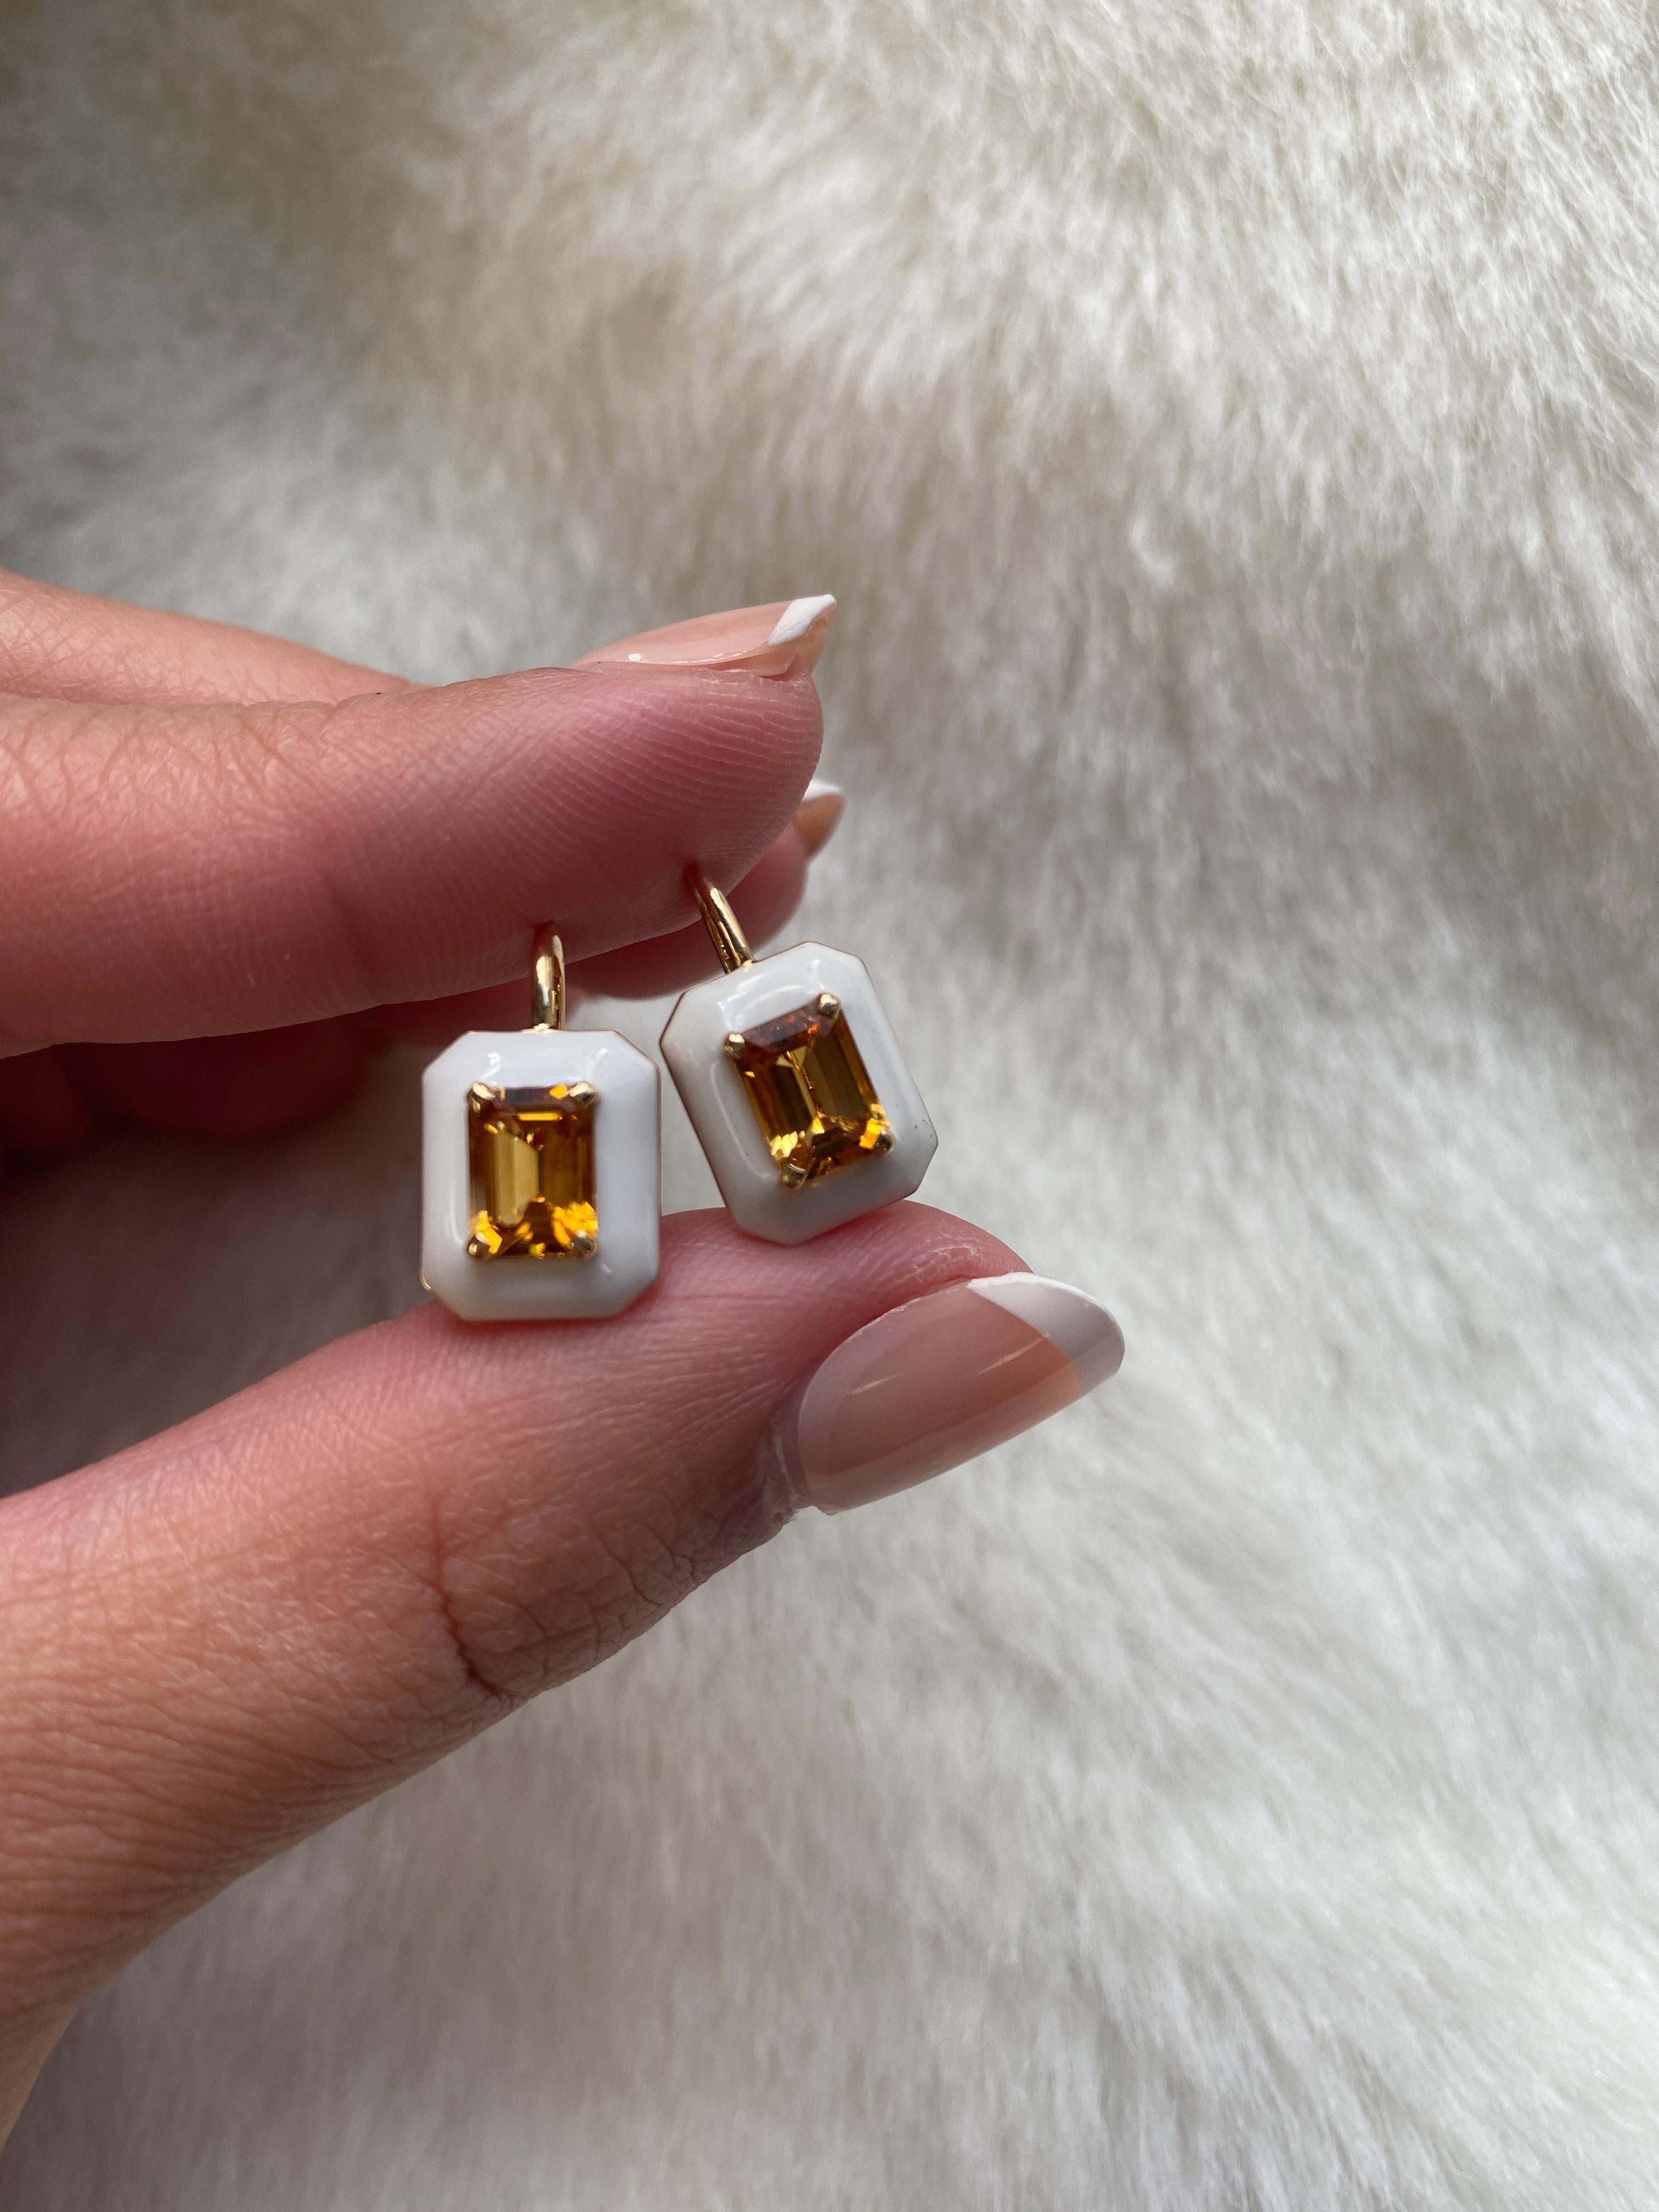 These unique earrings are a Citrine Emerald Cut, with White Enamel border and Lever back. From our ‘Queen’ Collection, it was inspired by royalty, but with a modern twist. The combination of enamel, and Citrine represents power, richness and passion